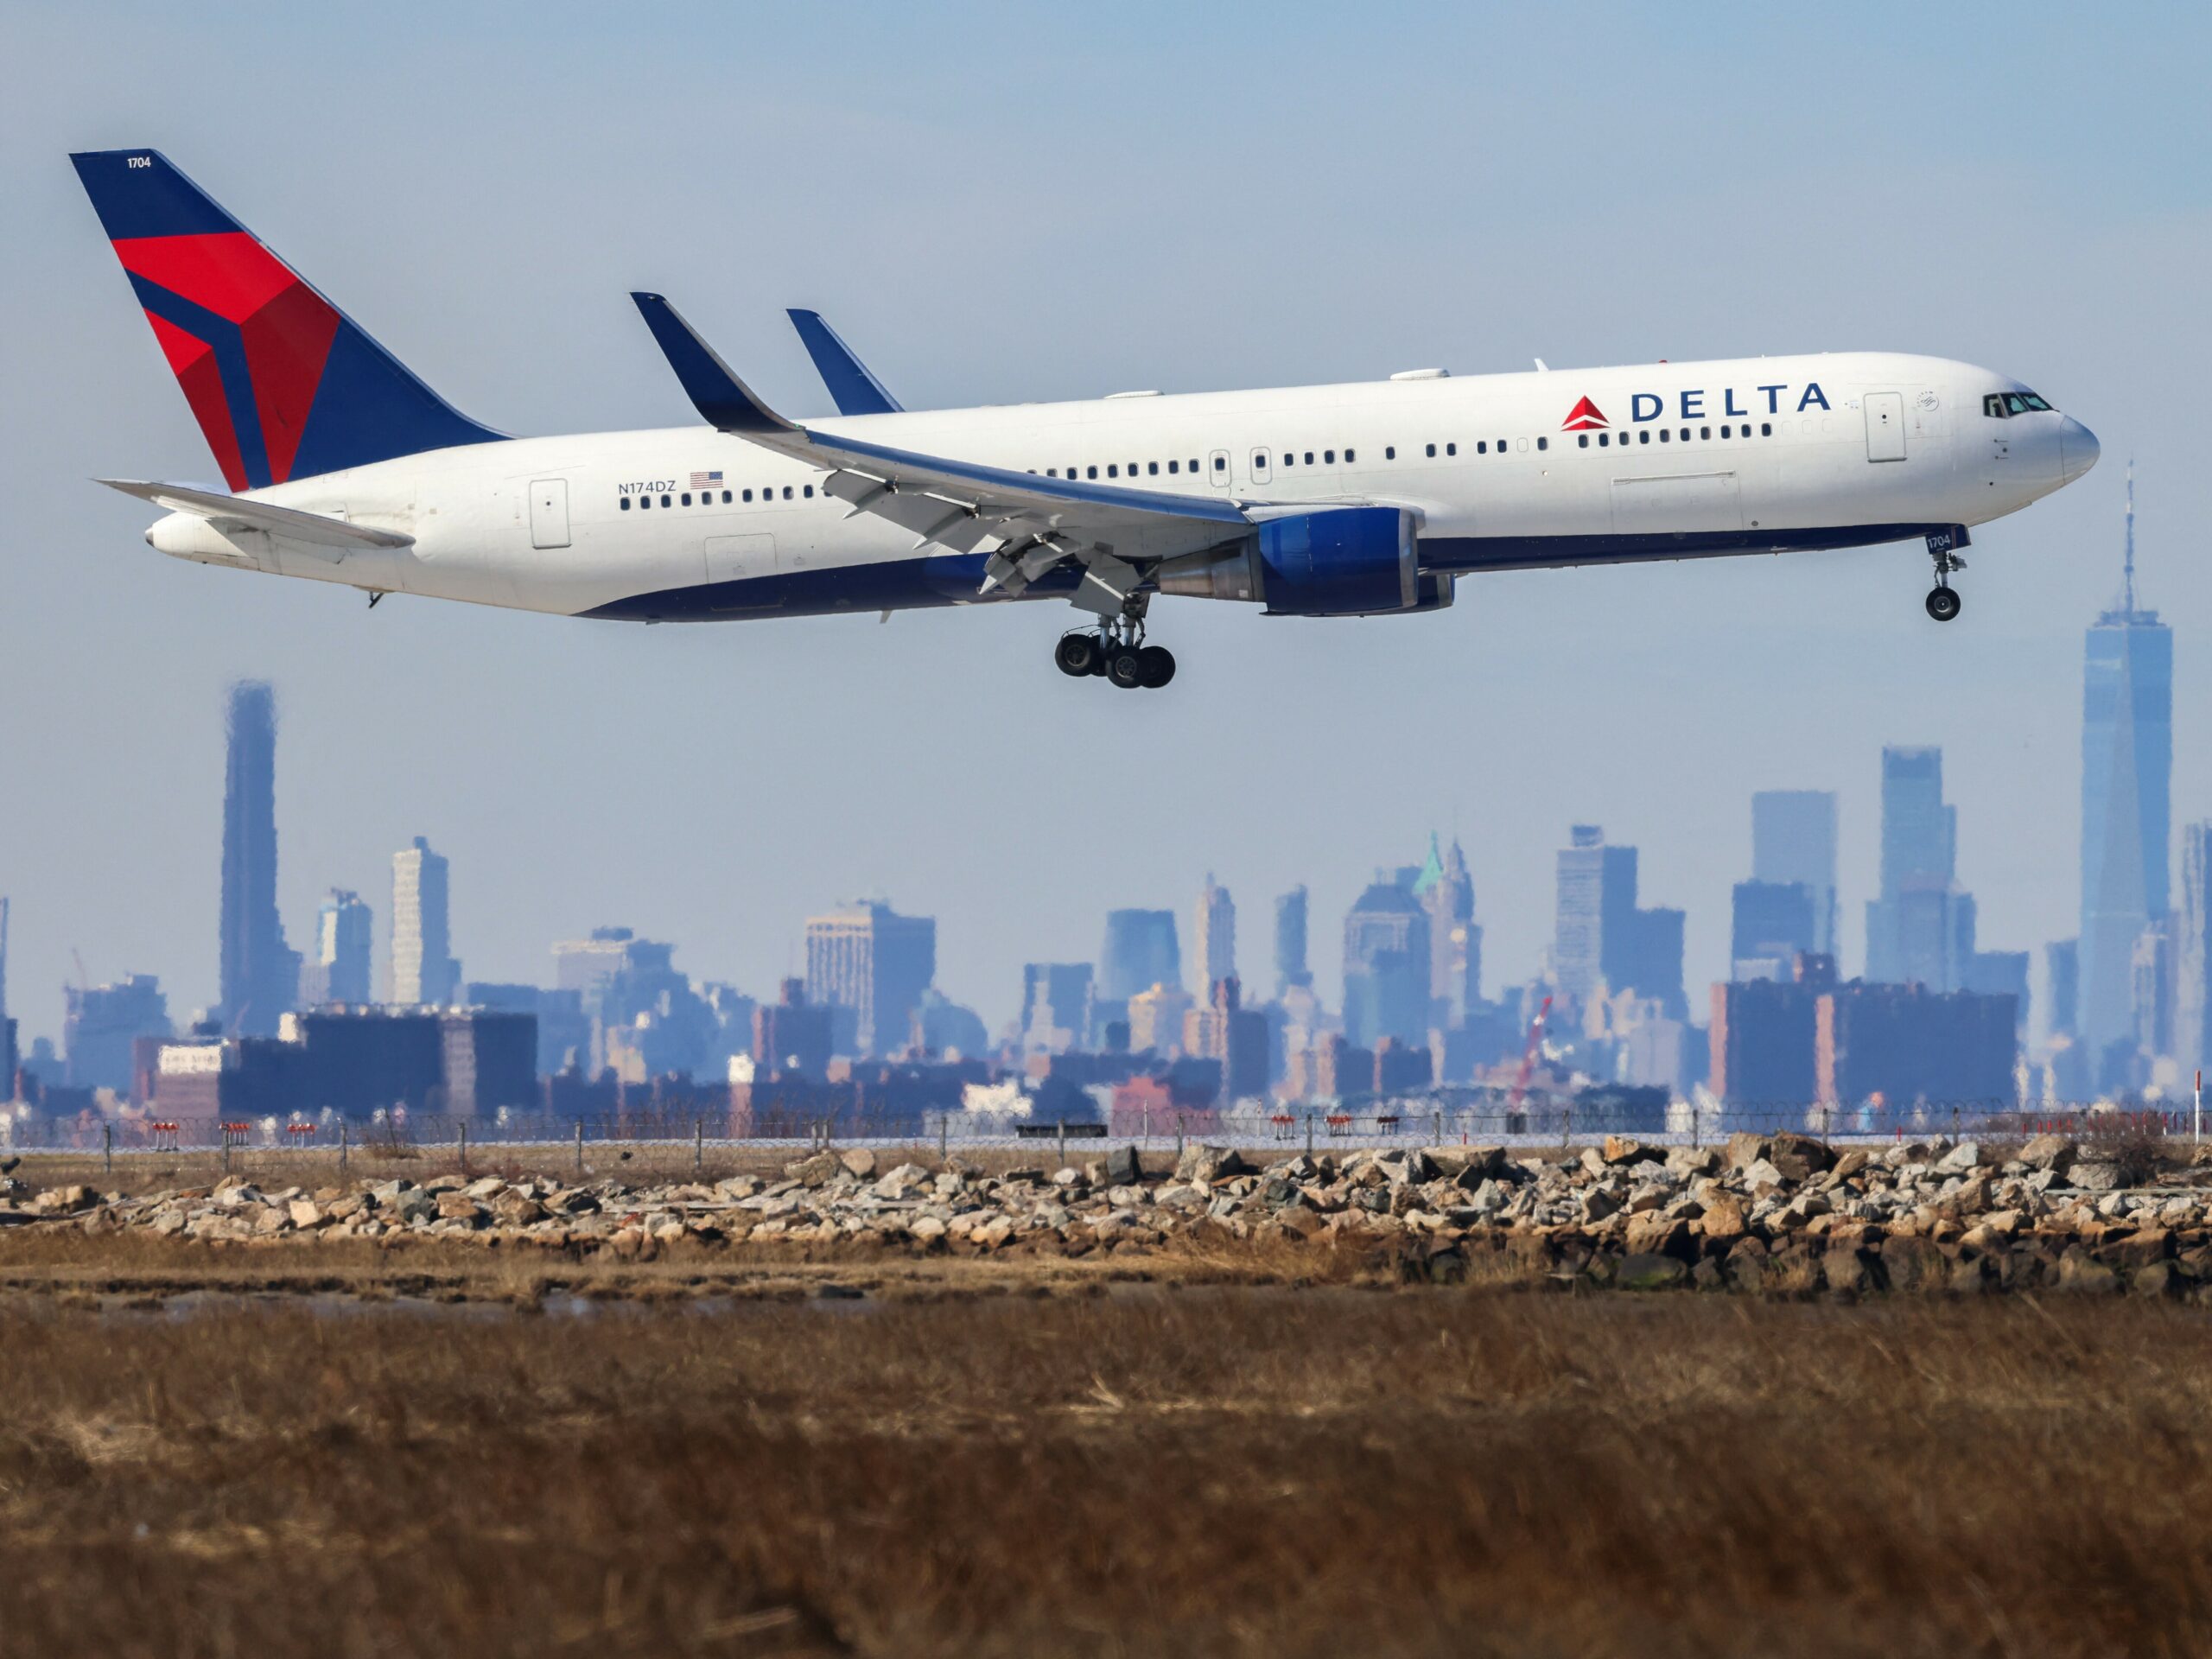 A Boeing 767 passenger aircraft of Delta Air Lines arrives from Dublin at JFK International Airport in New York as the Manhattan skyline looms in the background on Feb. 7, 2024.